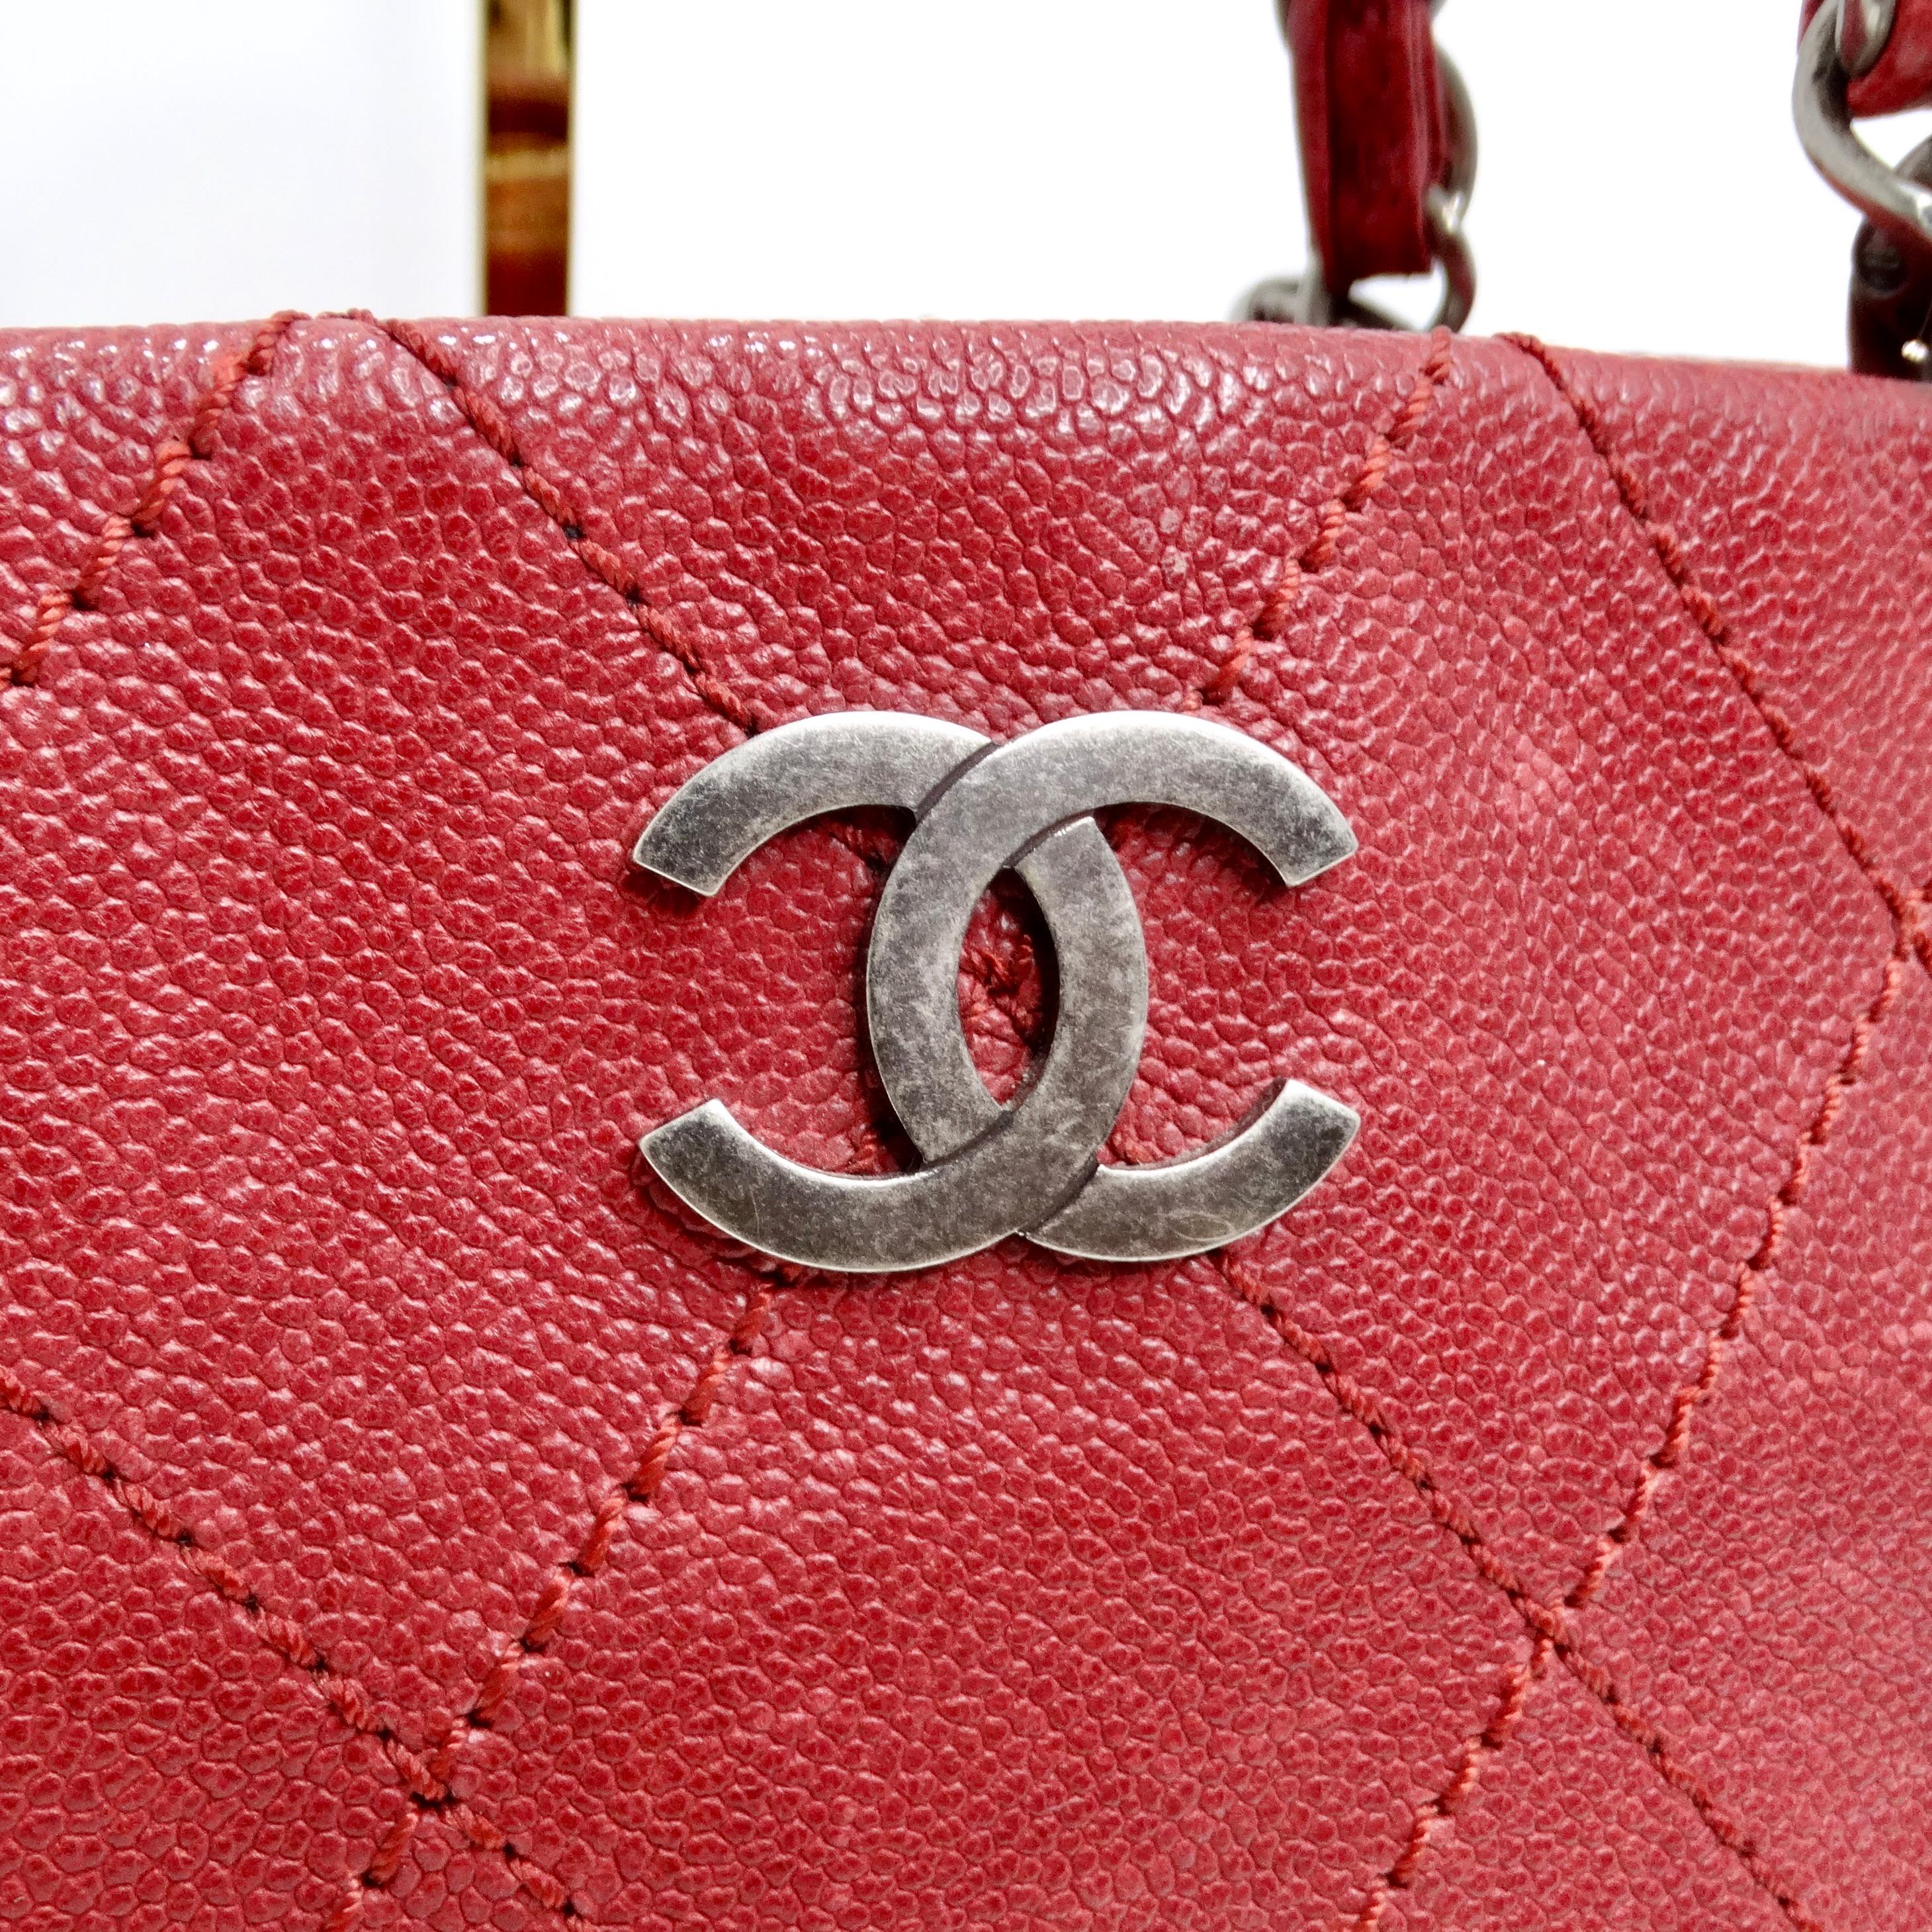 Introducing the timeless elegance of the Chanel Quilted Caviar Red Leather Shoulder Bag, a luxurious accessory that exudes sophistication and style. Crafted from sumptuous deep red quilted caviar leather, this medium-sized shopper shoulder bag is a